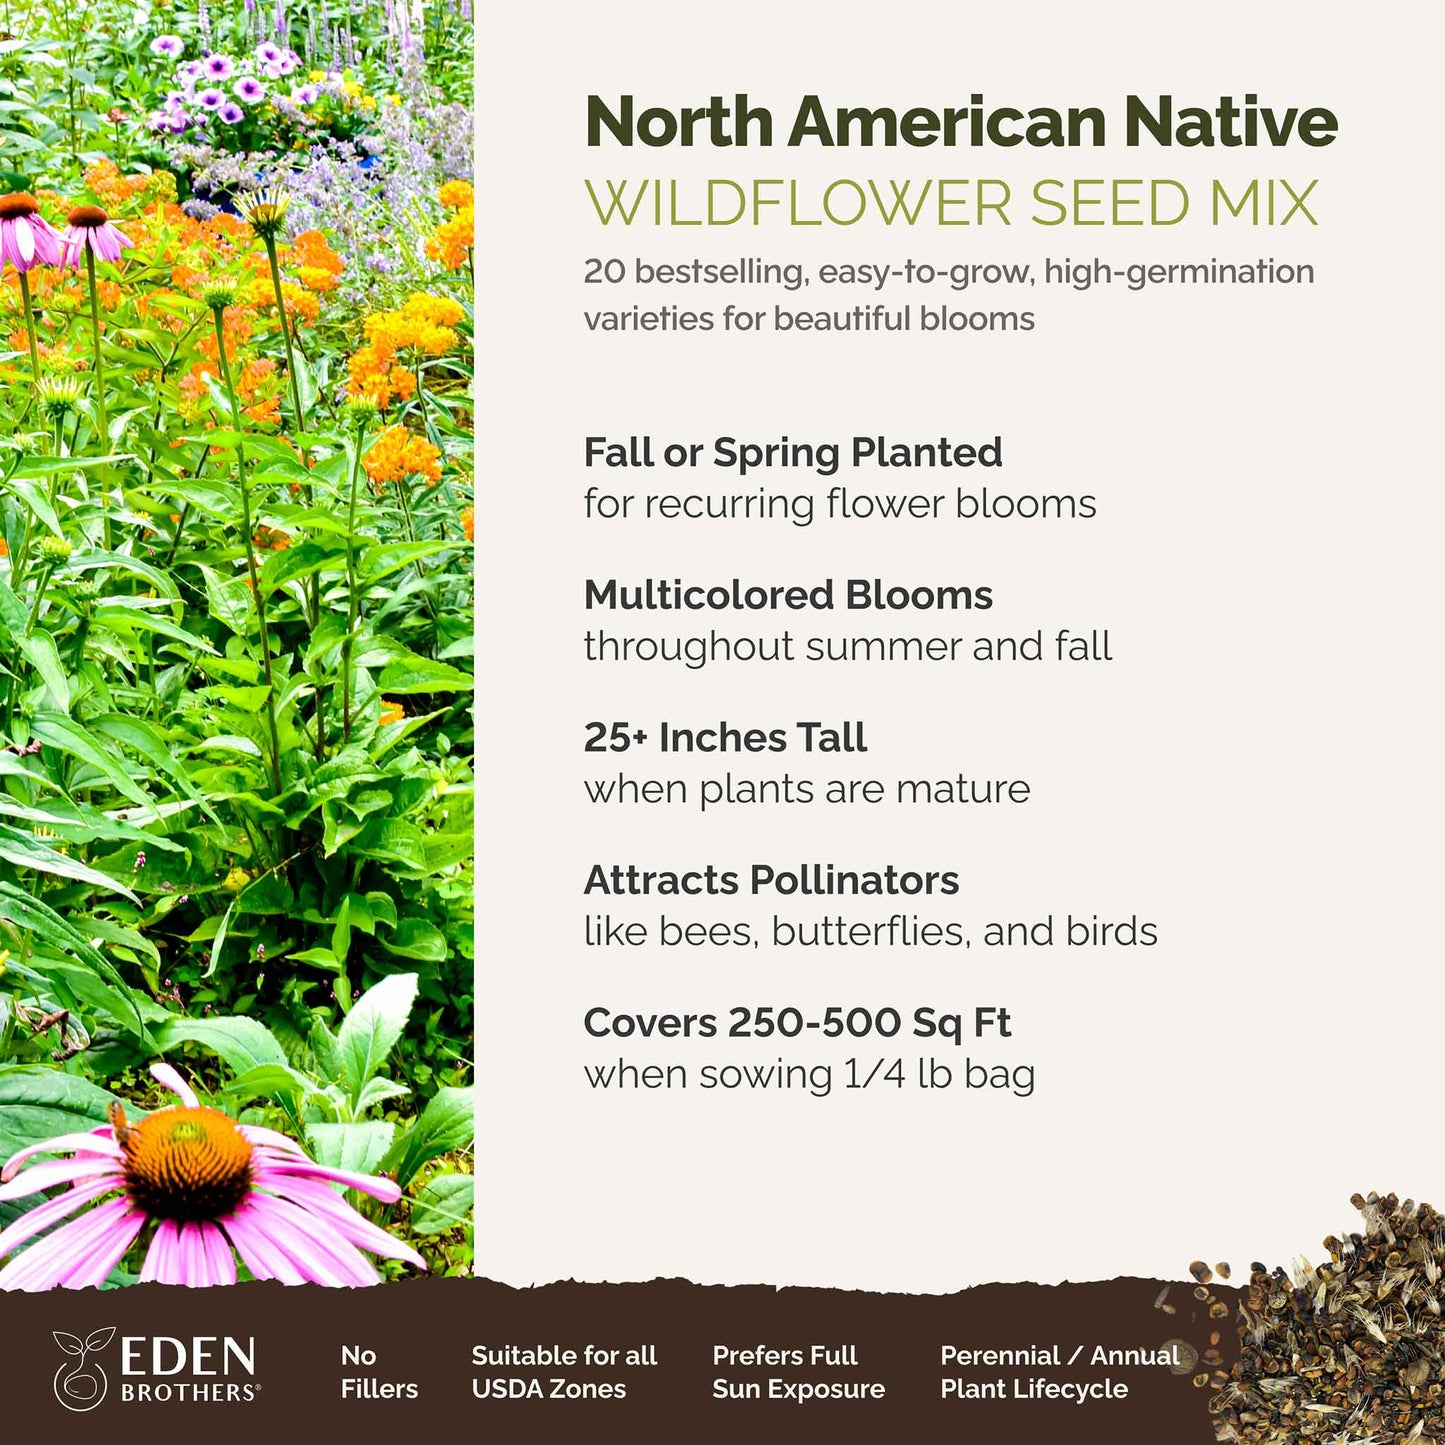 north american native overview